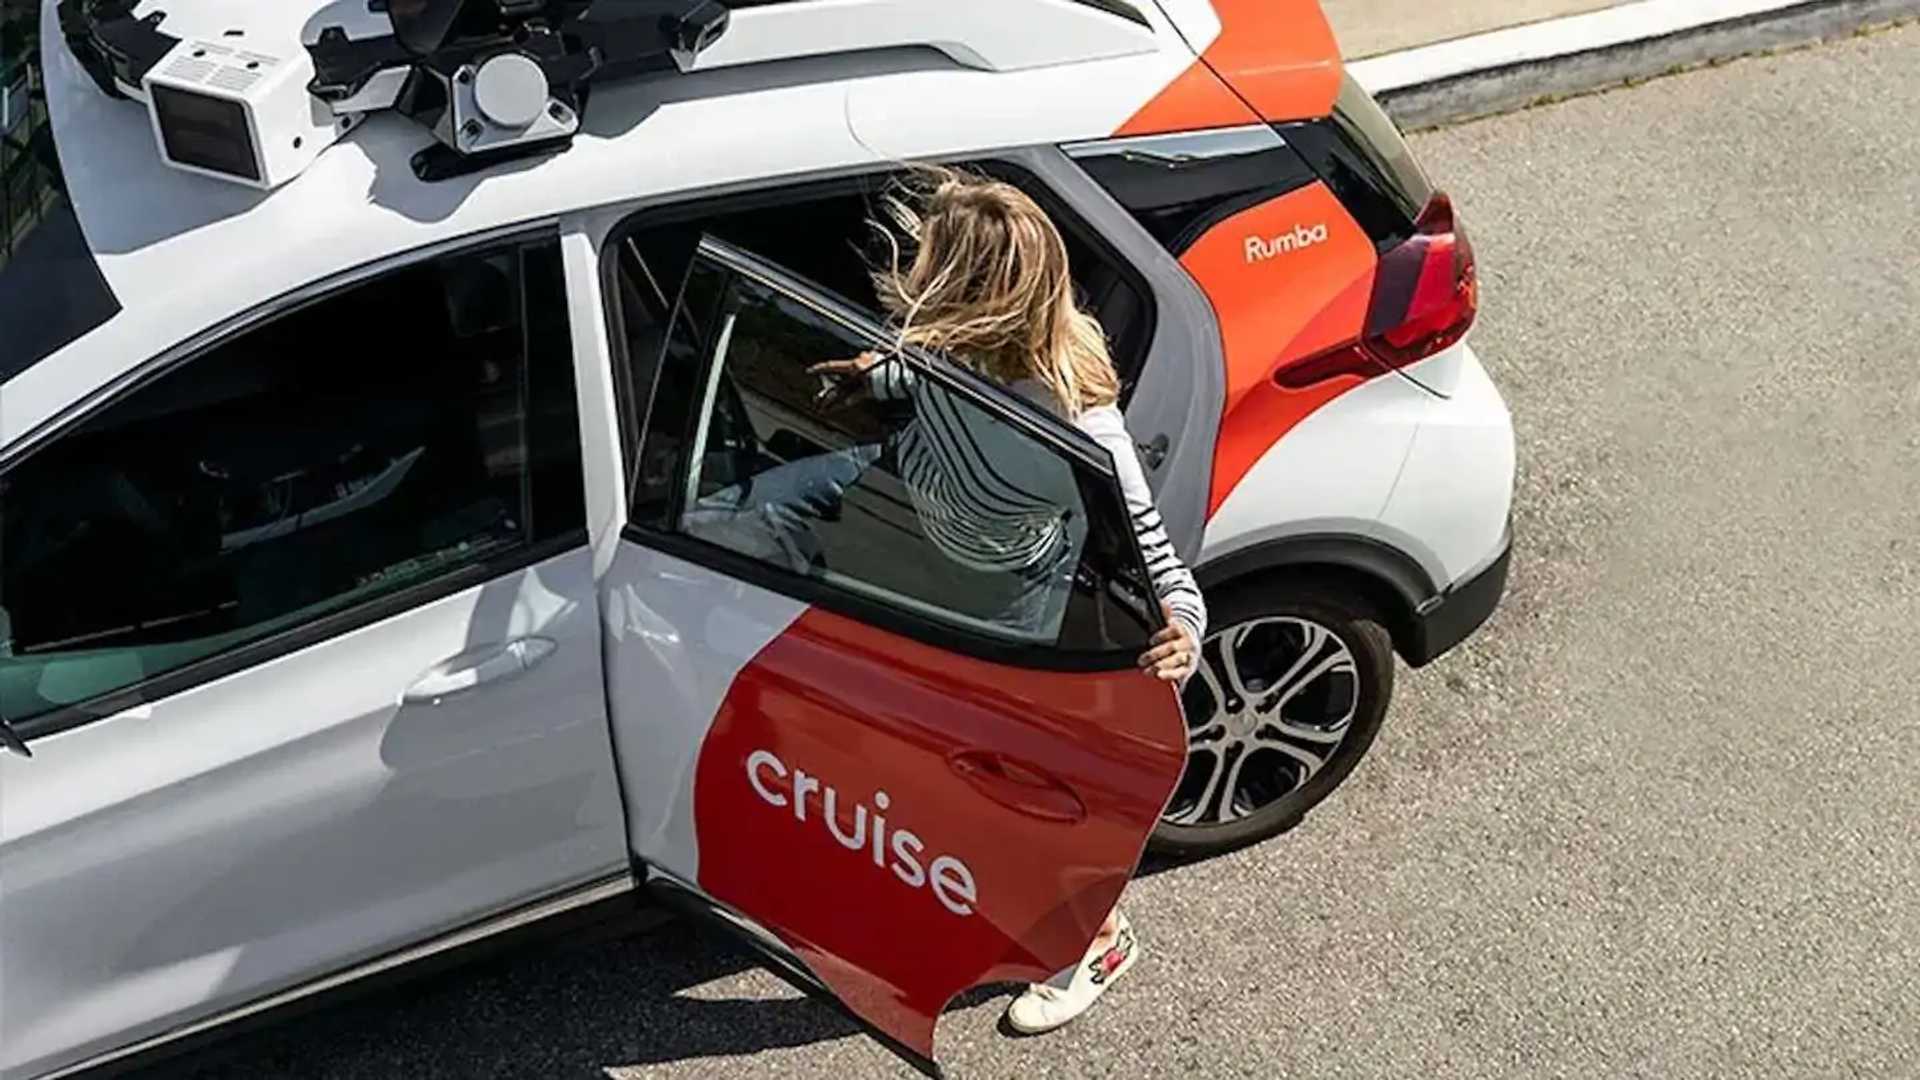 cruise to reduce robotaxi fleet by 50% in sf following fire truck collision